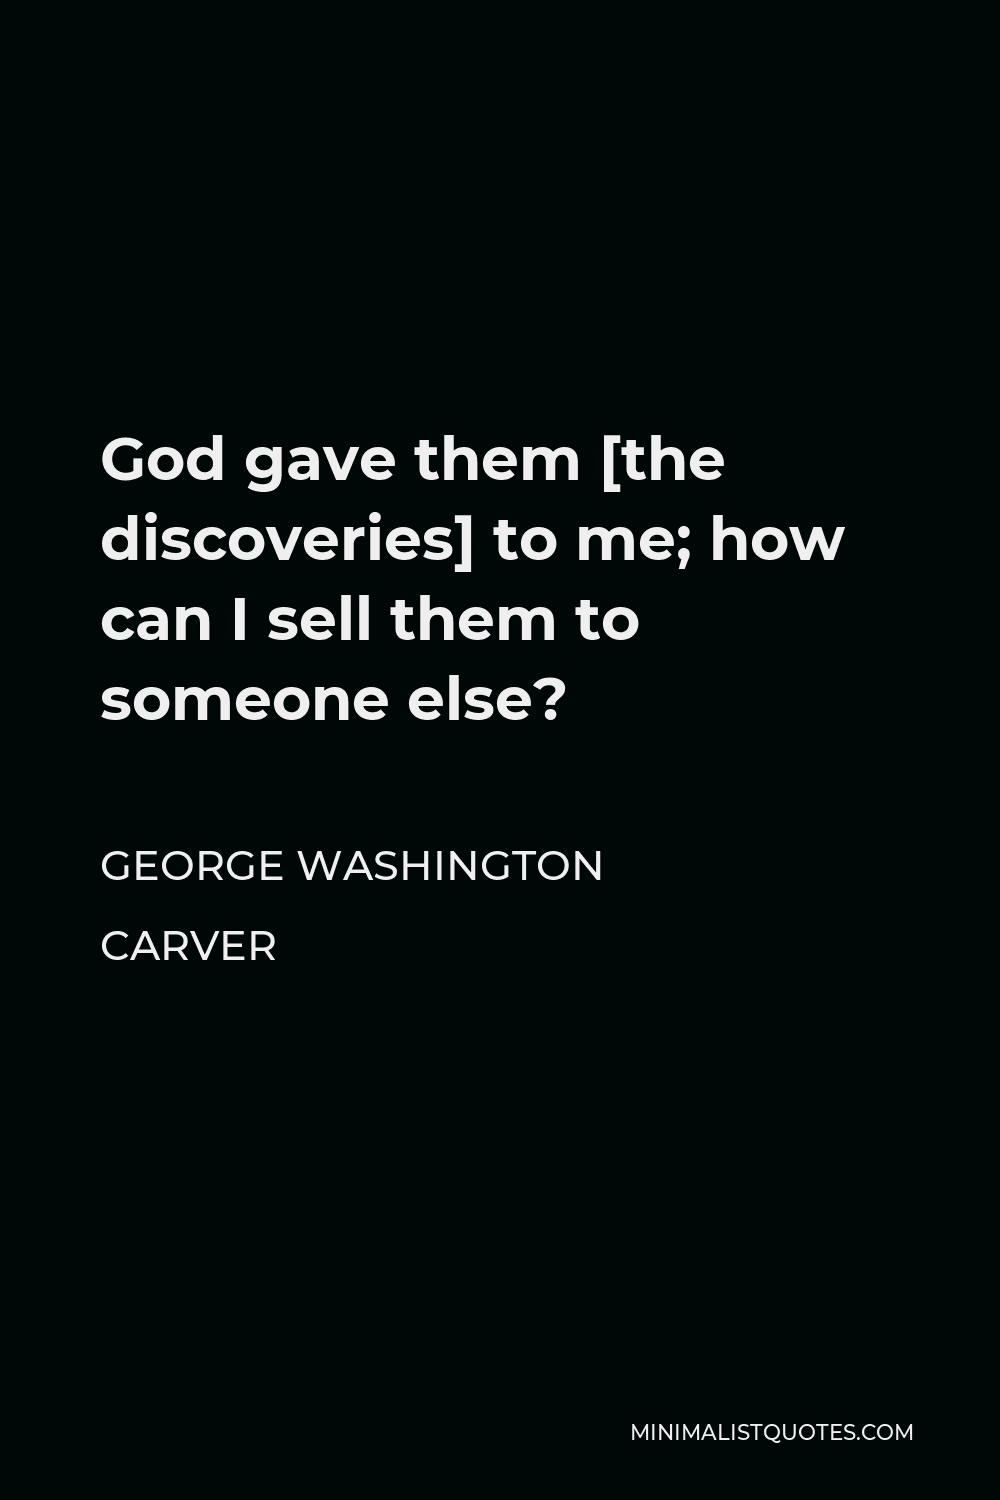 George Washington Carver Quote - God gave them [the discoveries] to me; how can I sell them to someone else?